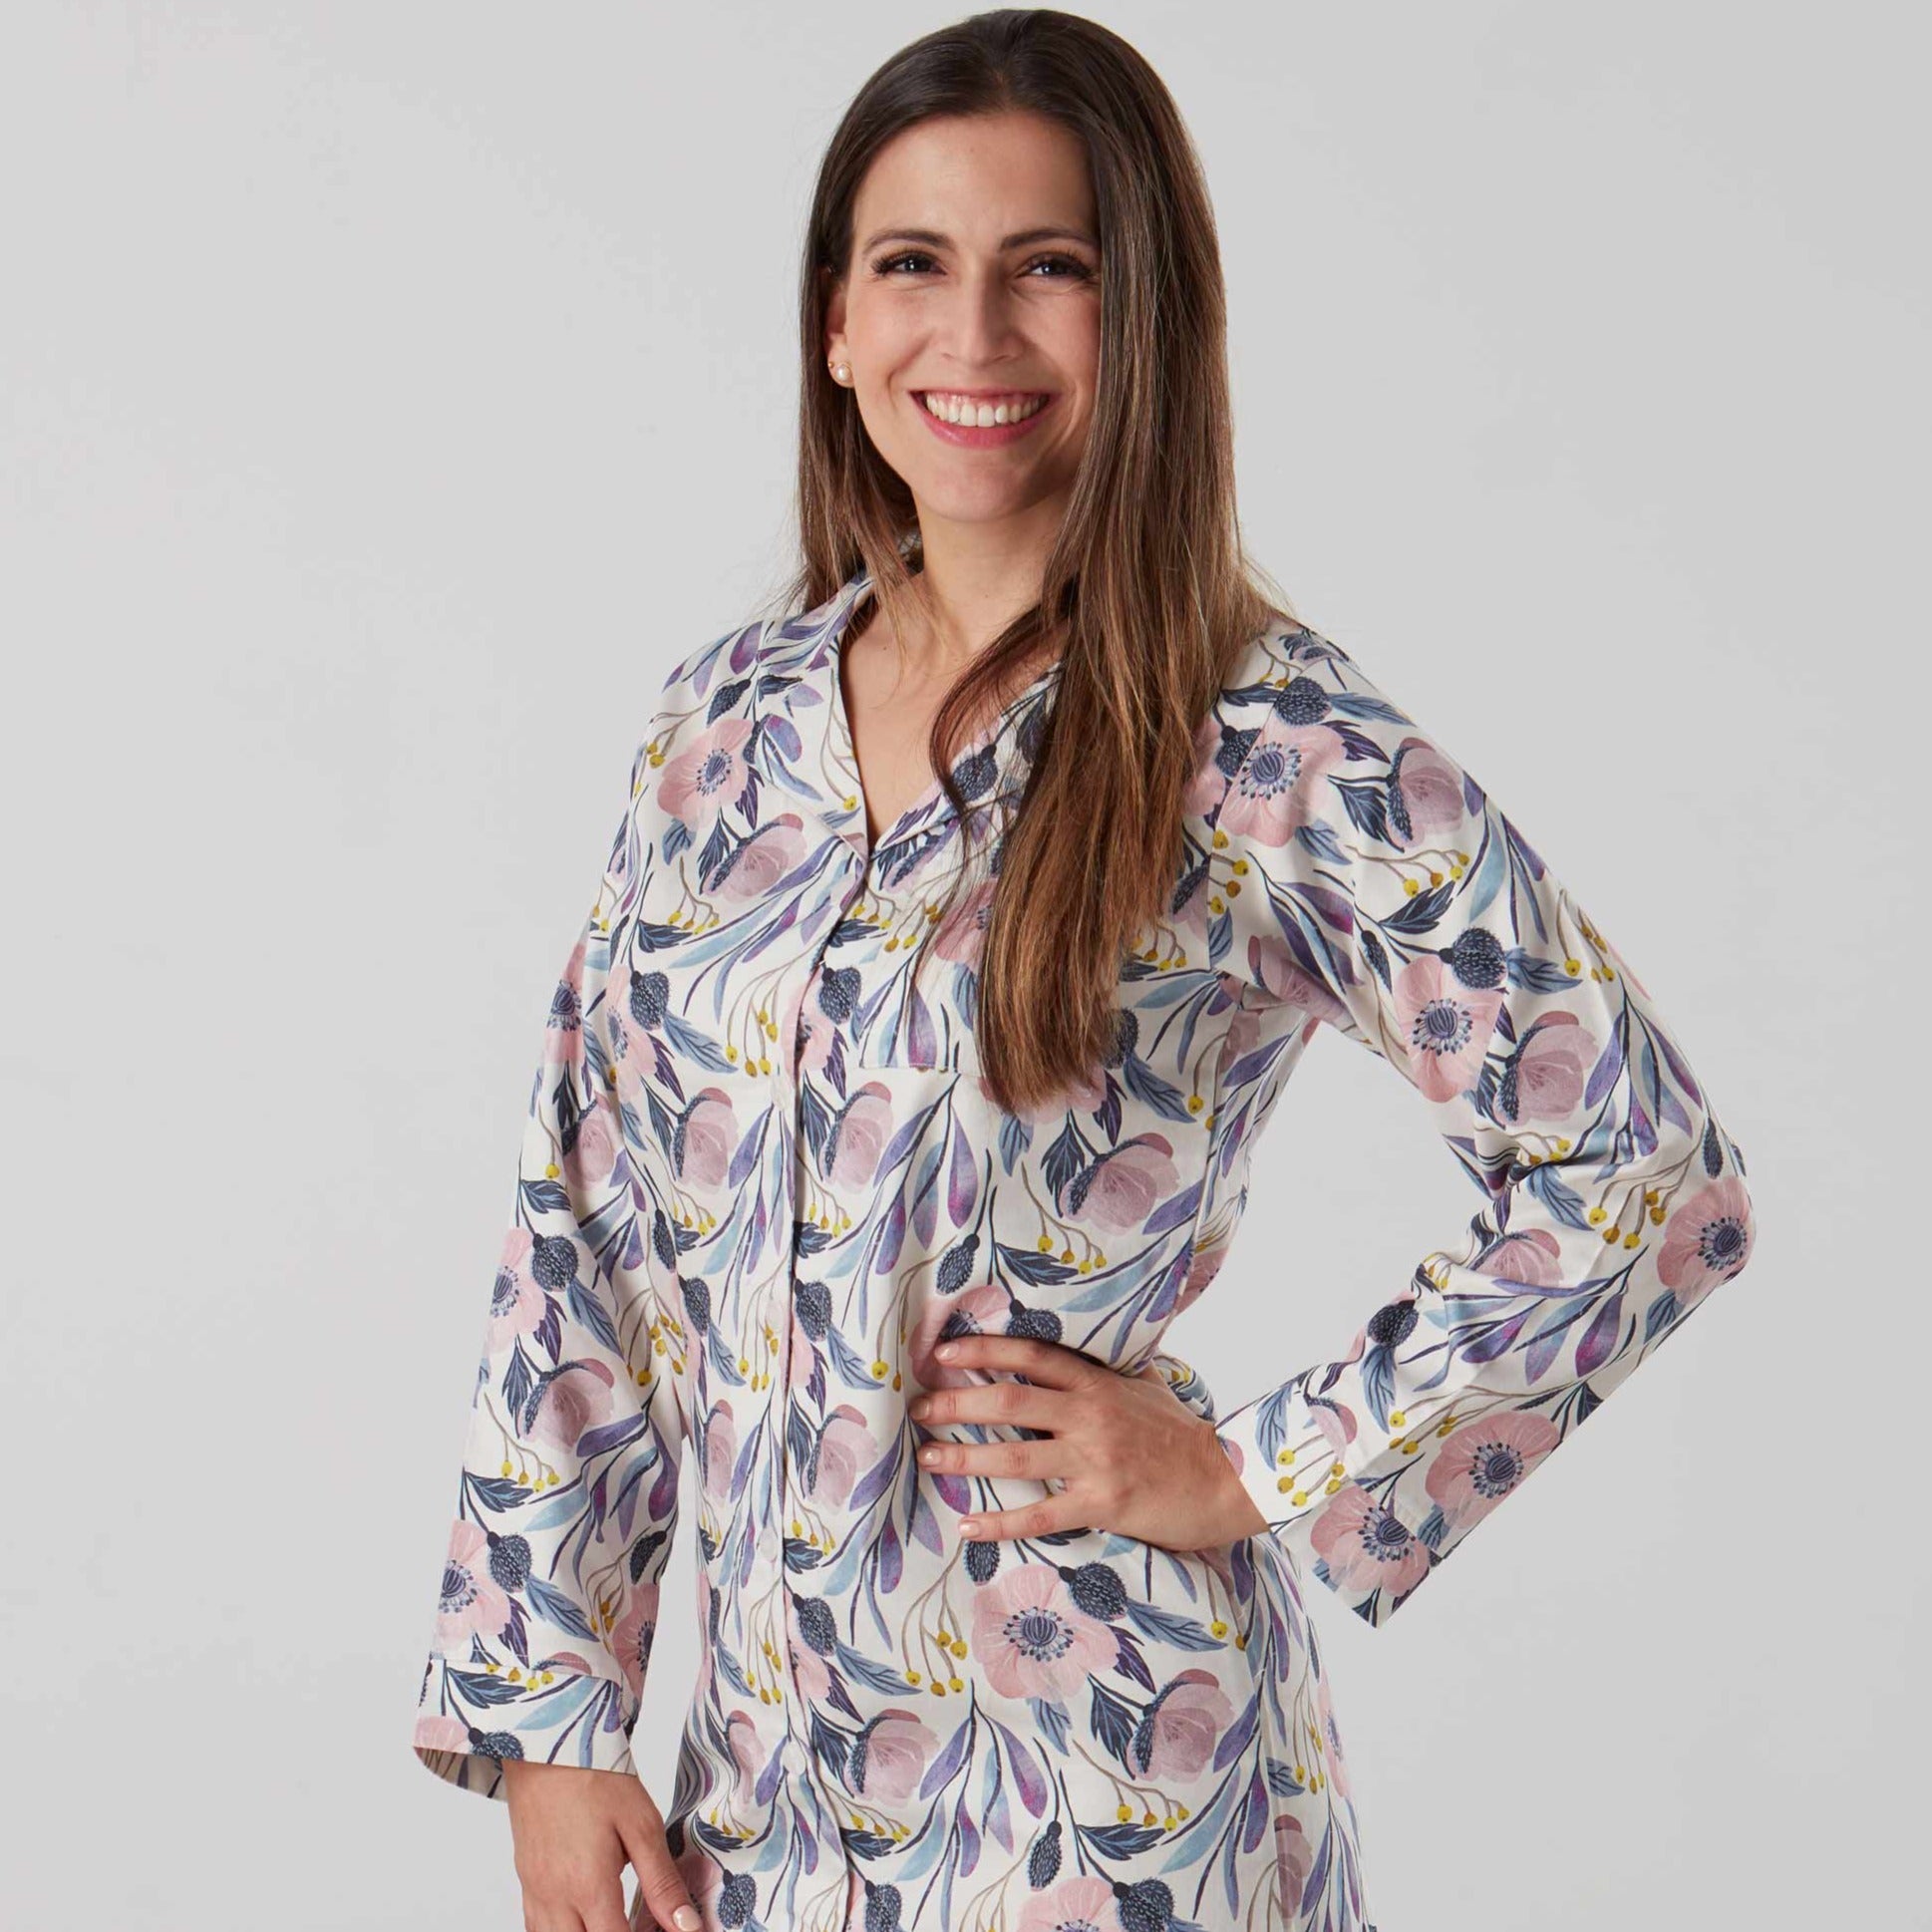 Luxurious sateen night shirt and robe in pink and blue floral - special ladies gift with matching pyjamas